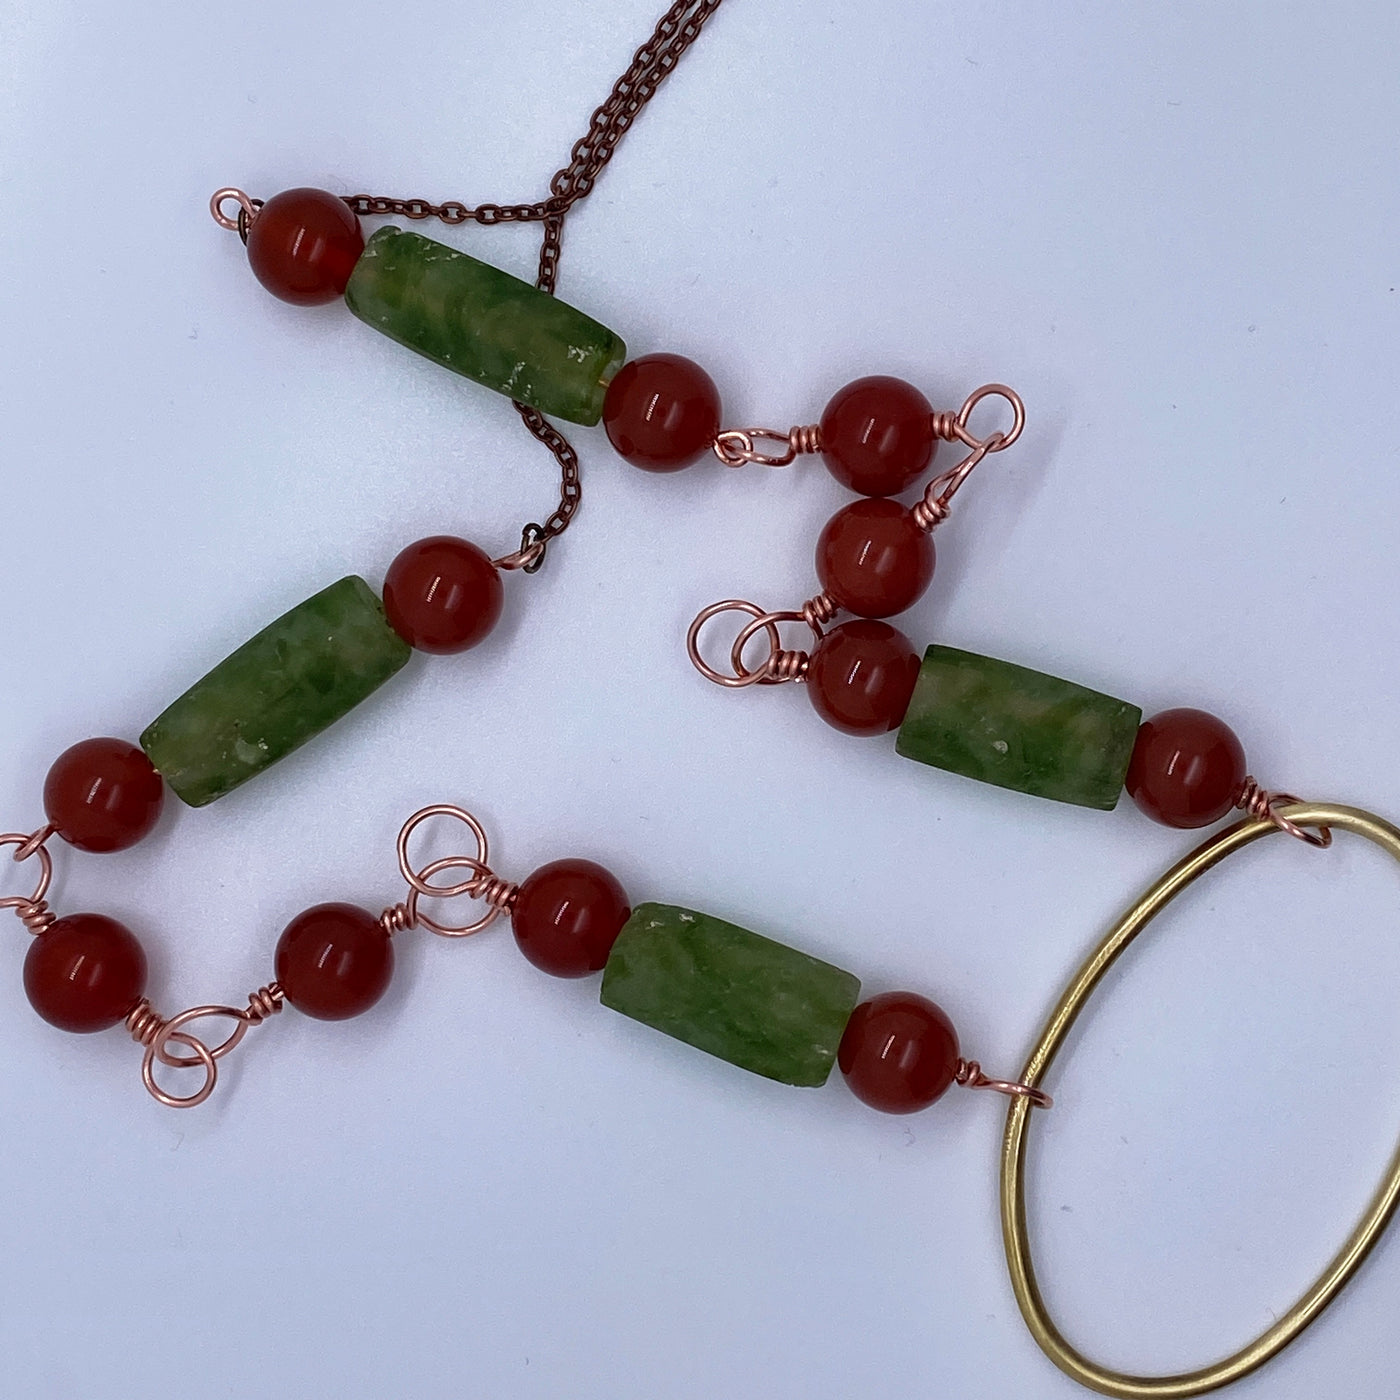 Glass beads and red agate necklace